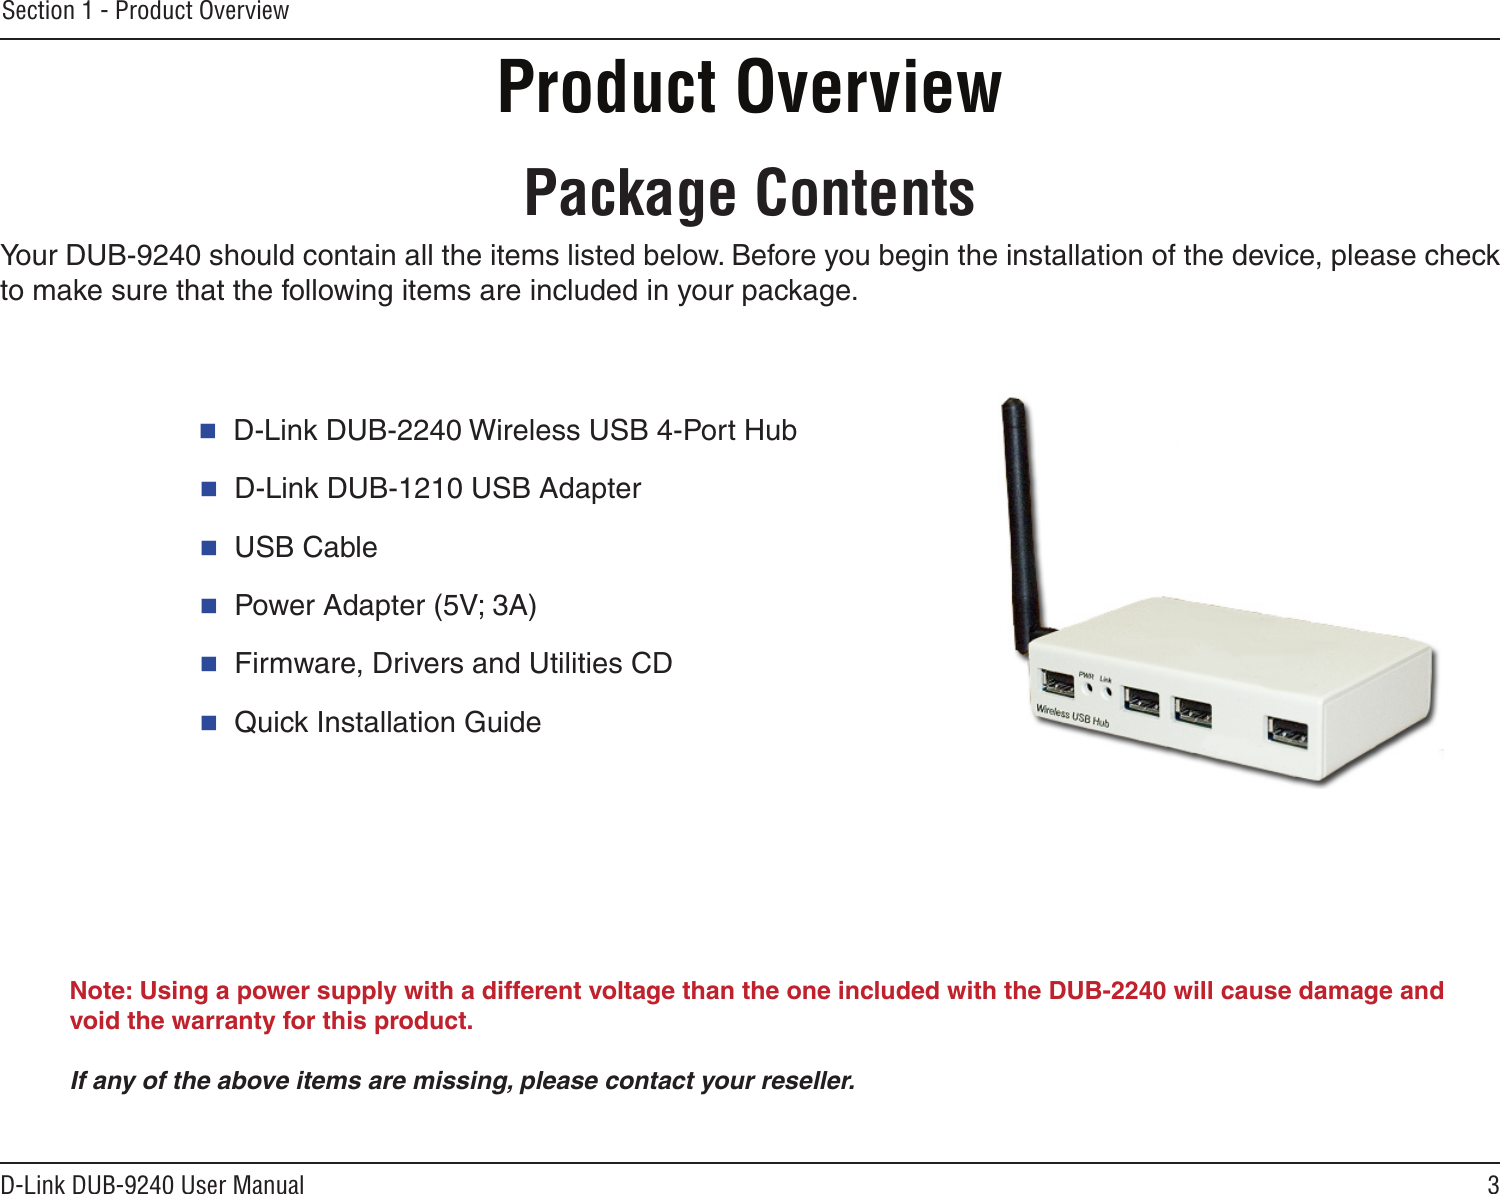 3D-Link DUB-9240 User ManualSection 1 - Product OverviewProduct Overview  D-Link DUB-2240 Wireless USB 4-Port Hub  D-Link DUB-1210 USB Adapter  USB Cable  Power Adapter (5V; 3A)  Firmware, Drivers and Utilities CD  Quick Installation GuidePackage ContentsNote: Using a power supply with a different voltage than the one included with the DUB-2240 will cause damage and void the warranty for this product.If any of the above items are missing, please contact your reseller.Your DUB-9240 should contain all the items listed below. Before you begin the installation of the device, please check to make sure that the following items are included in your package.